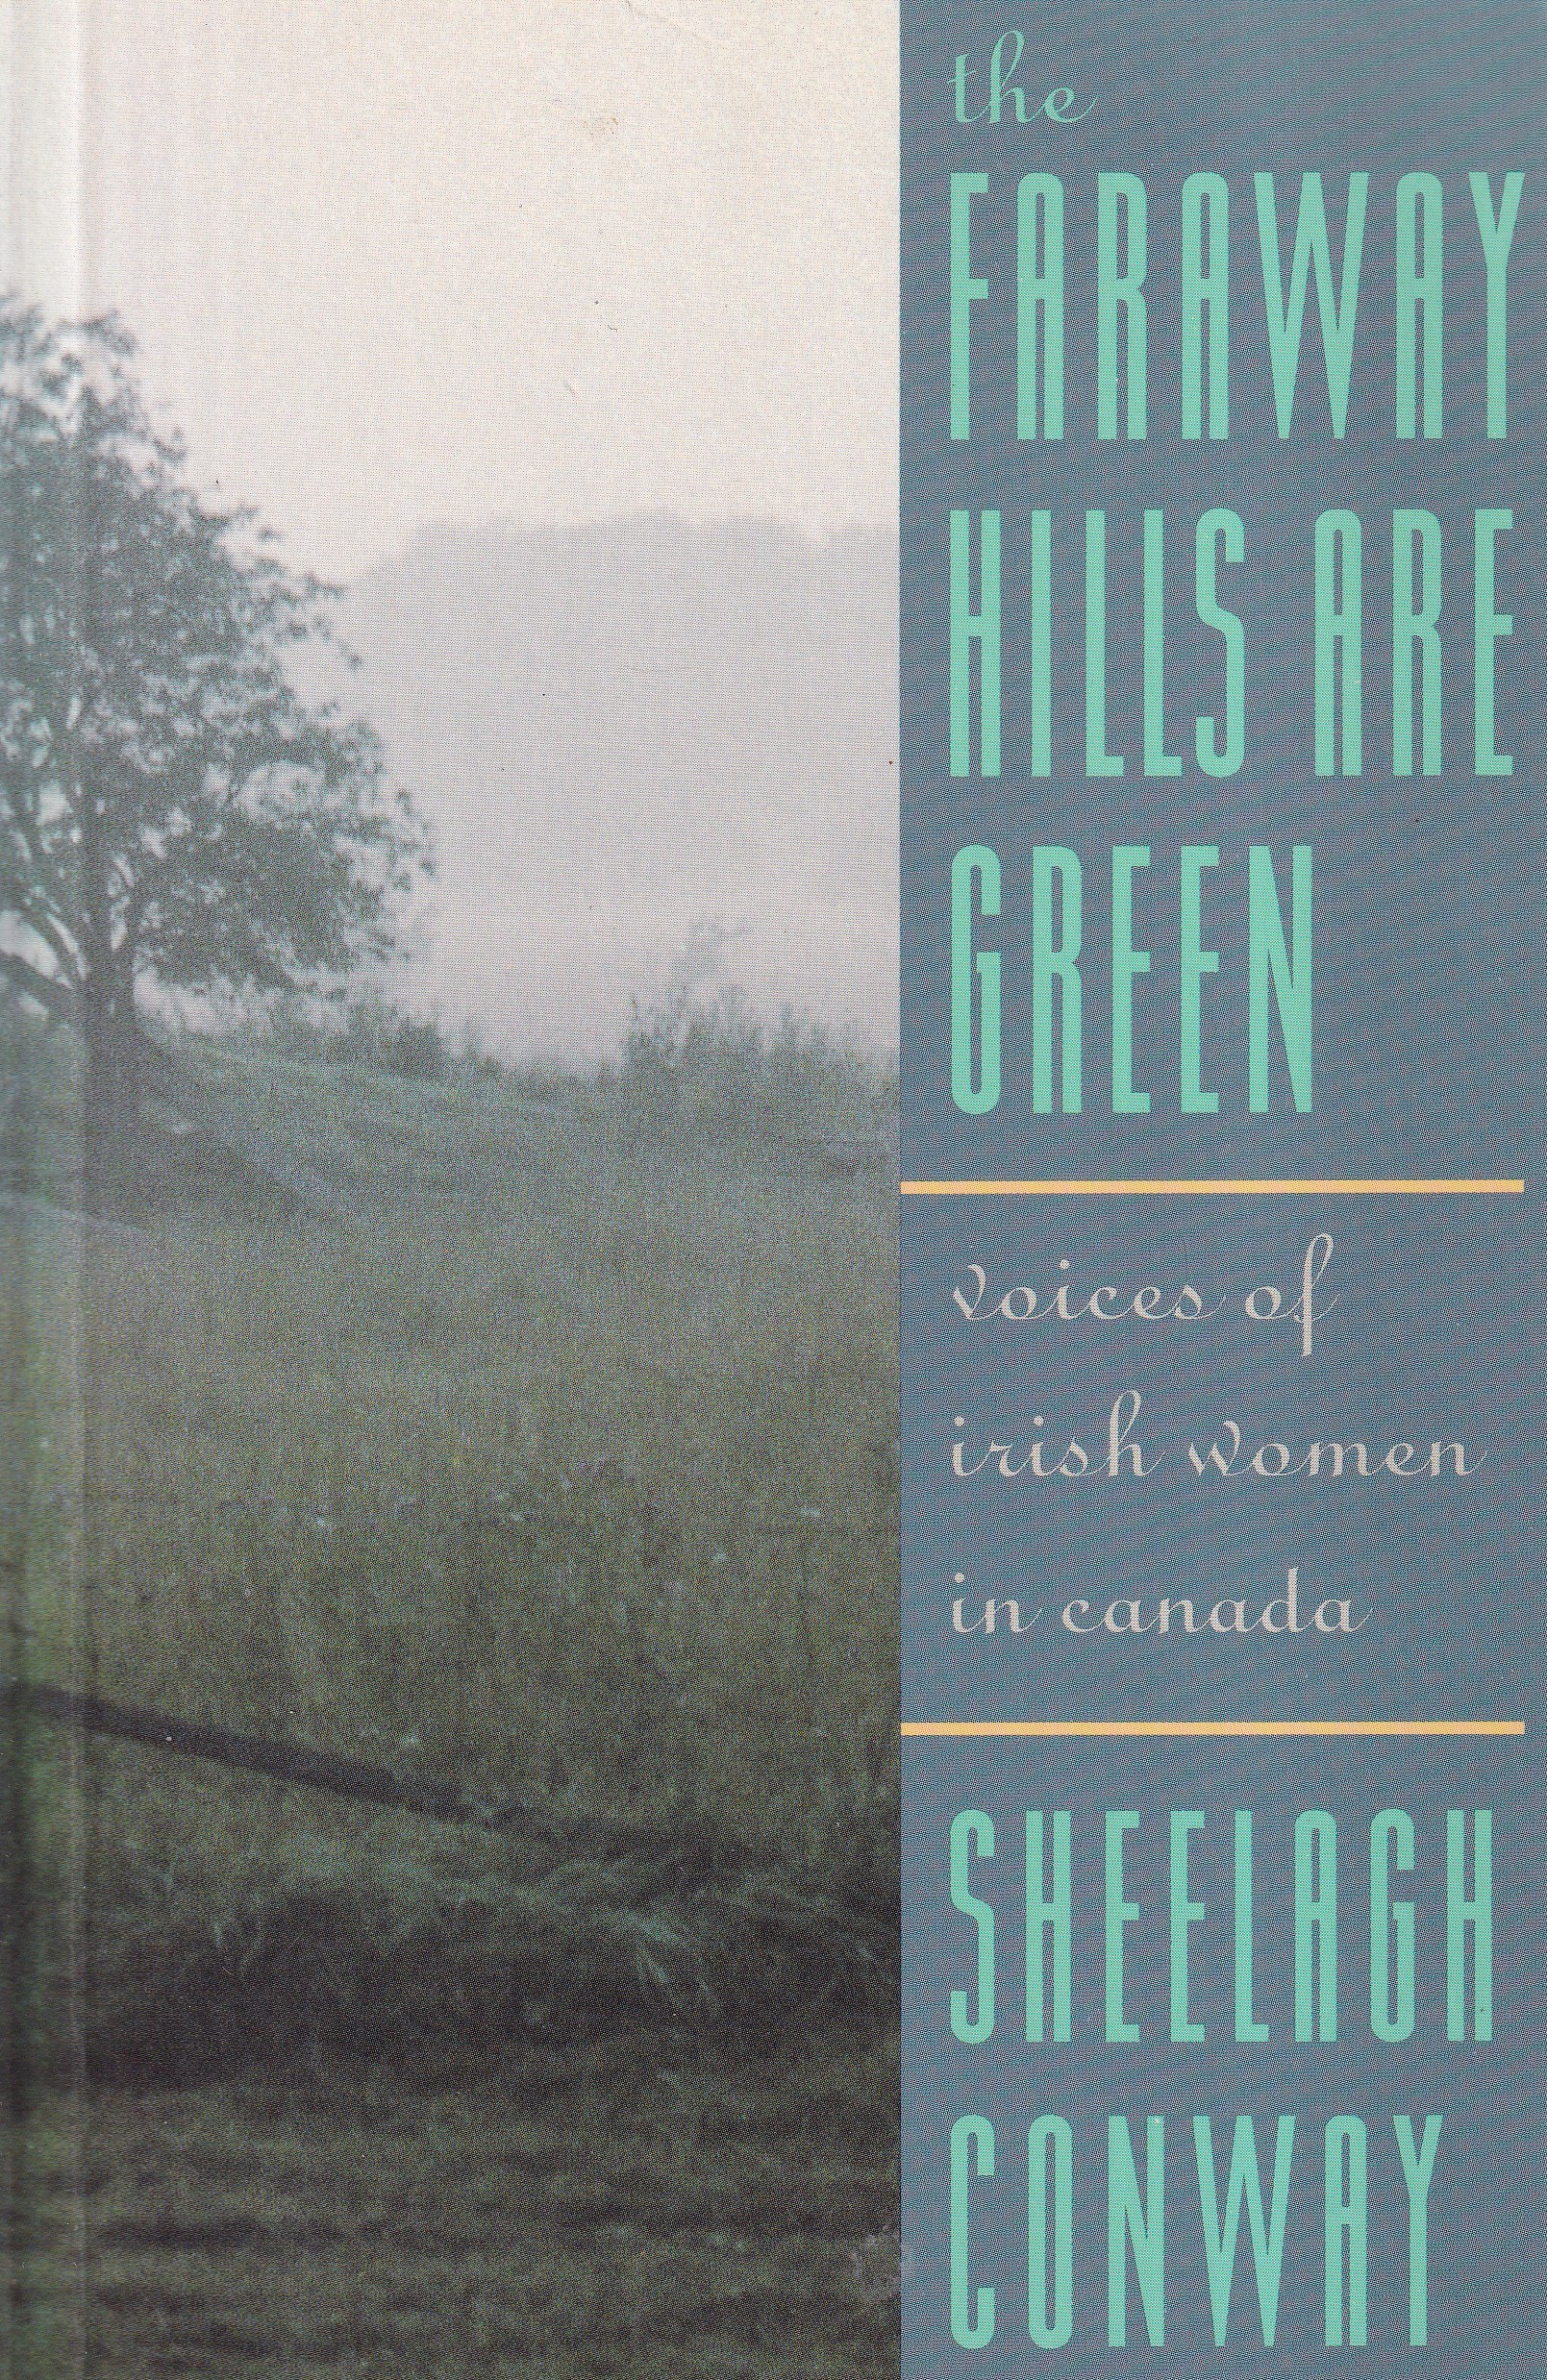 The Faraway Hills Are Green: Voices of Irish Women in Canada | Sheelagh Conway | Charlie Byrne's